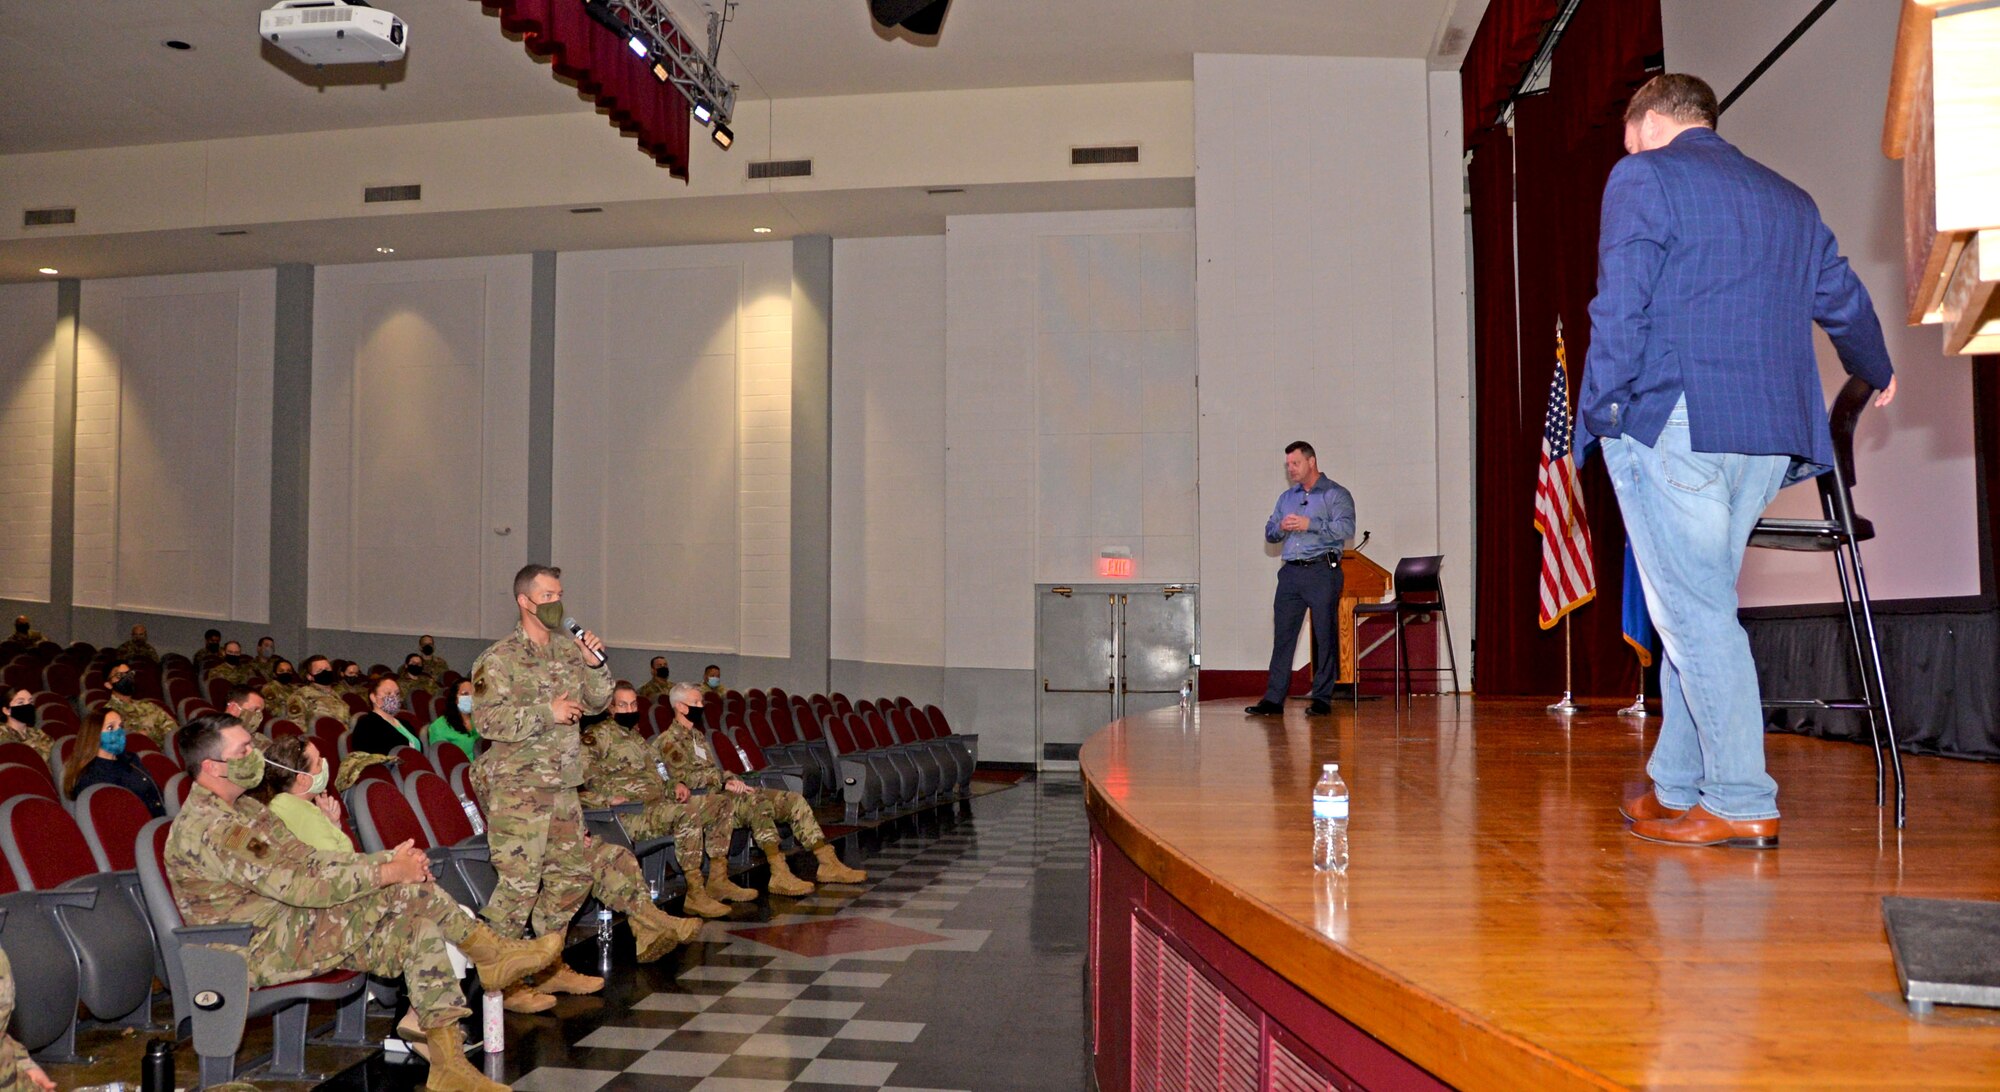 Col. Mark Estlund, 960th Cyberspace Operations Group commander, asks a question to Ernie Stevens and Joe Smarro, San Antonio Police Department Mental Health Unit officers, during the 960th Cyberspace Wing Mental Health and Resiliency Fair, May 1, 2021, at Joint Base San Antonio-Lackland, Texas. (U.S. Air Force photo by Tech. Sgt. Samantha Mathison)